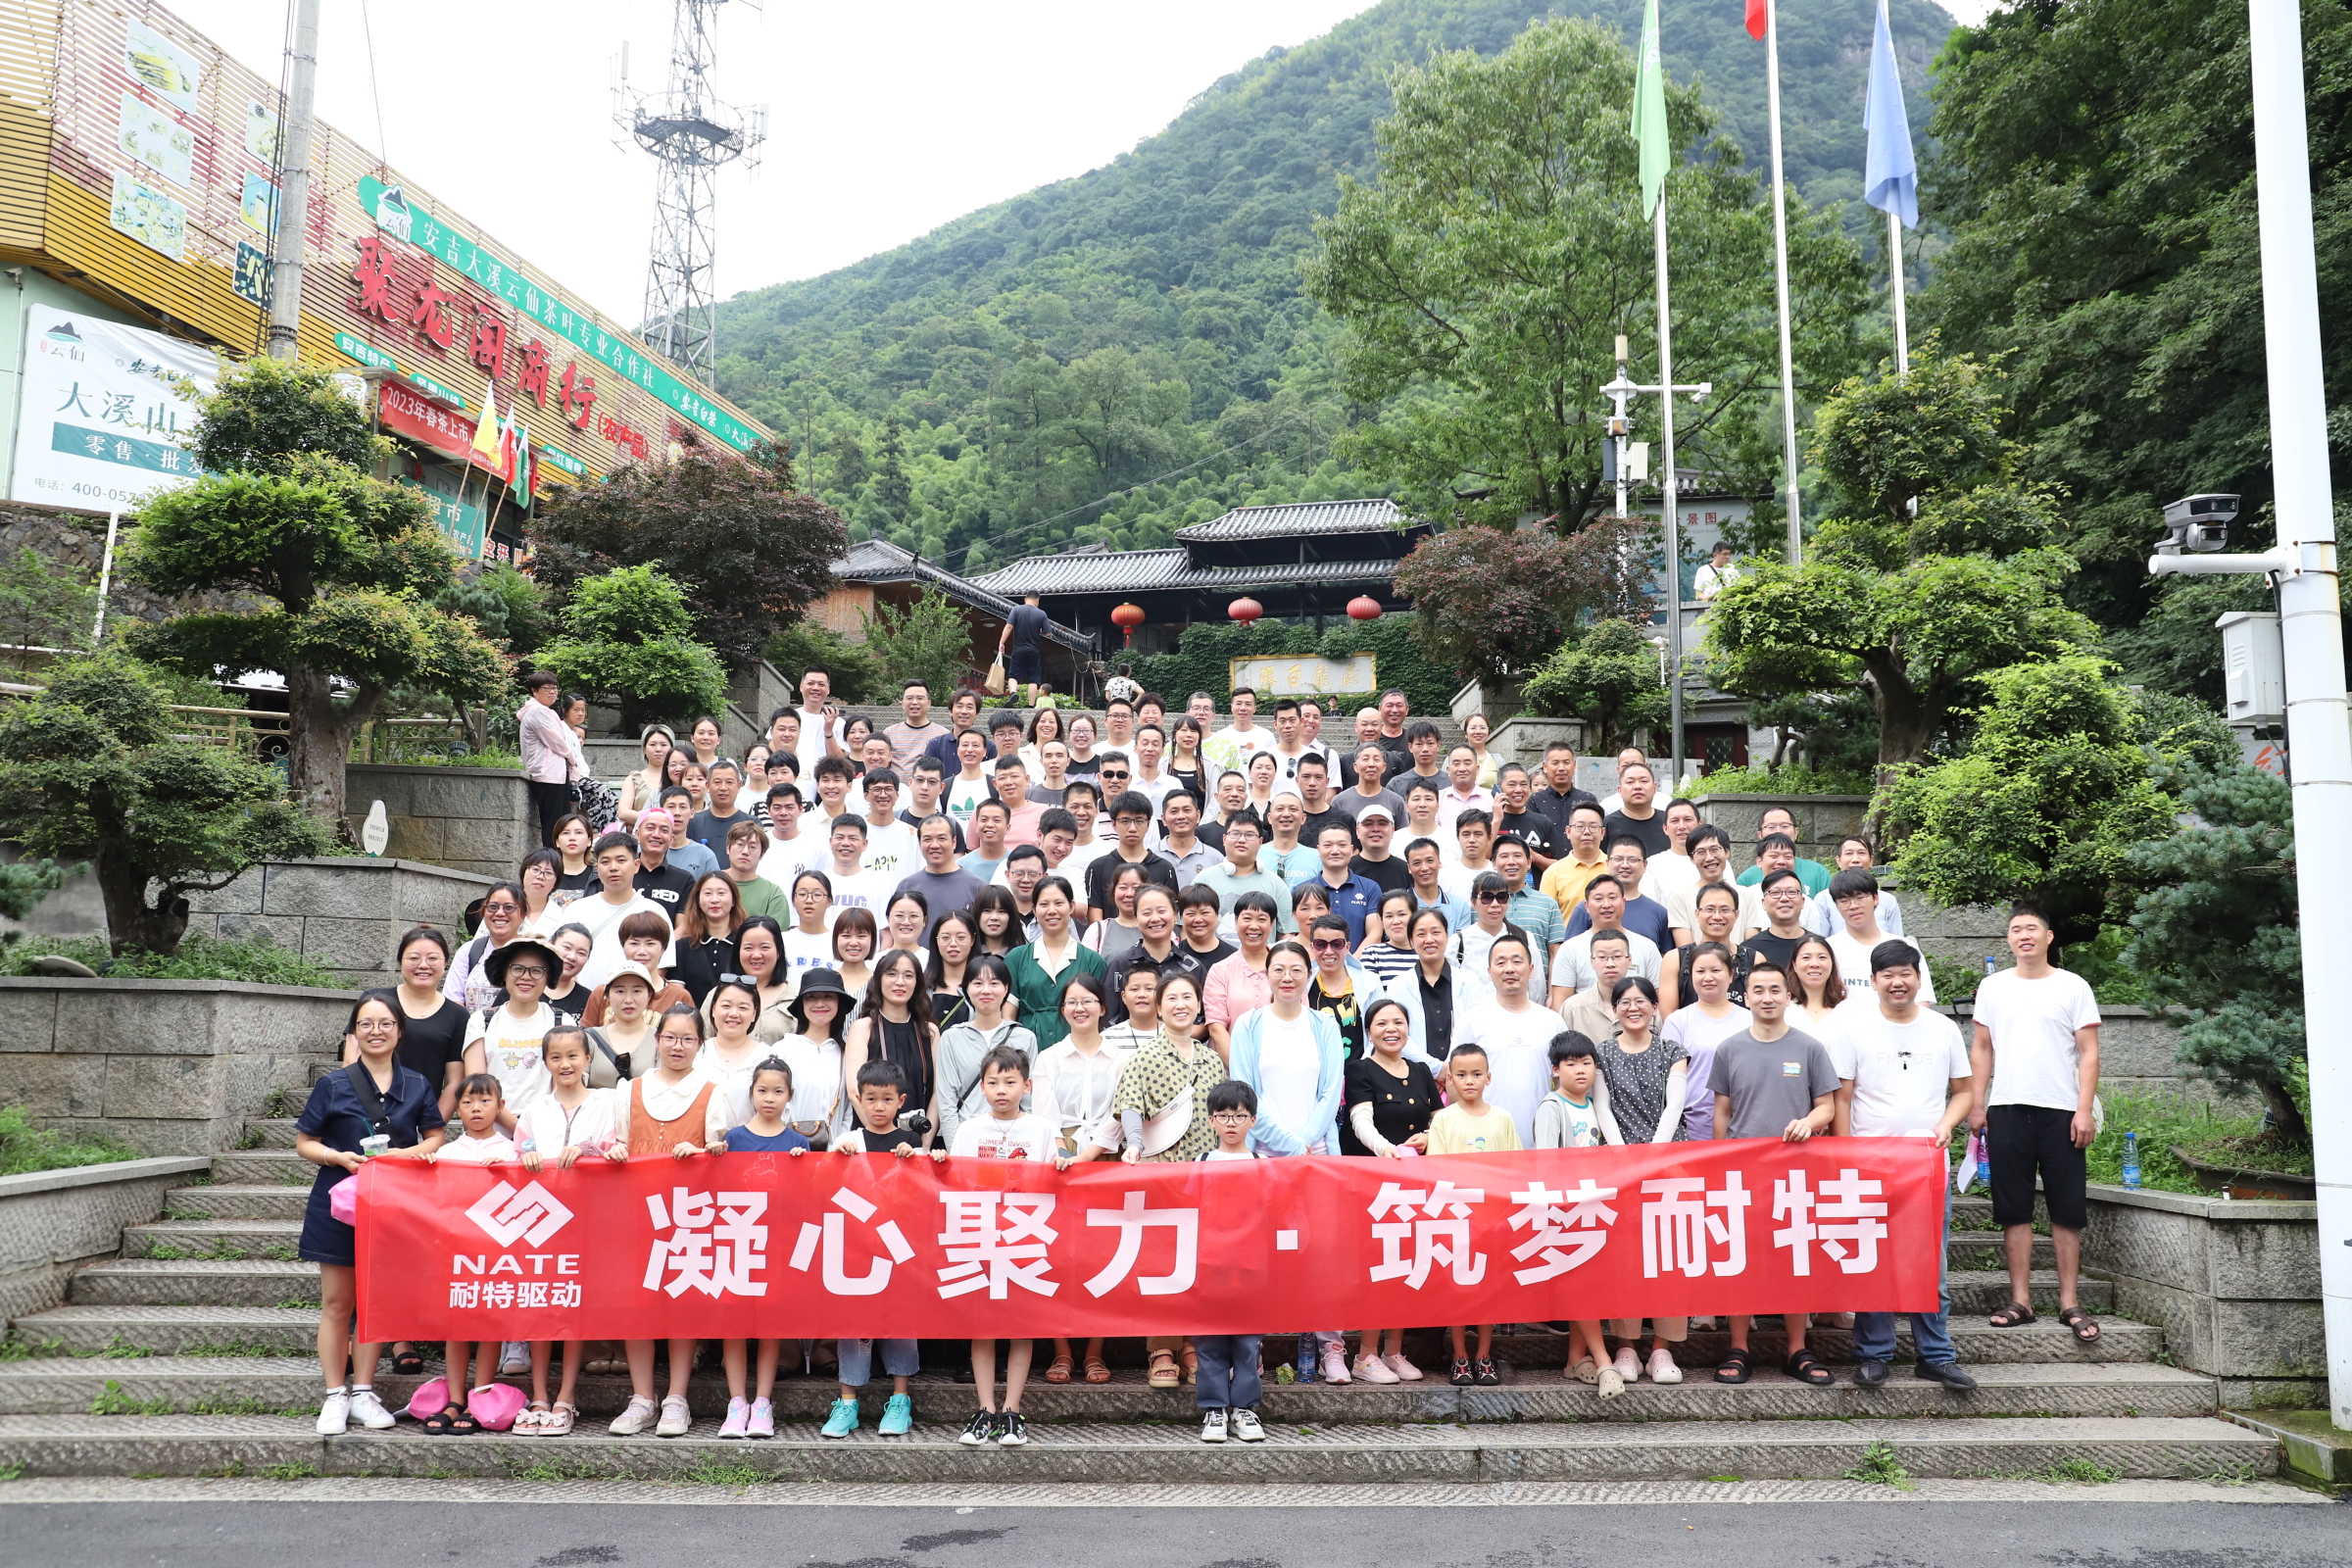 Two-day tour of Anji, Huzhou, built by Nate Group